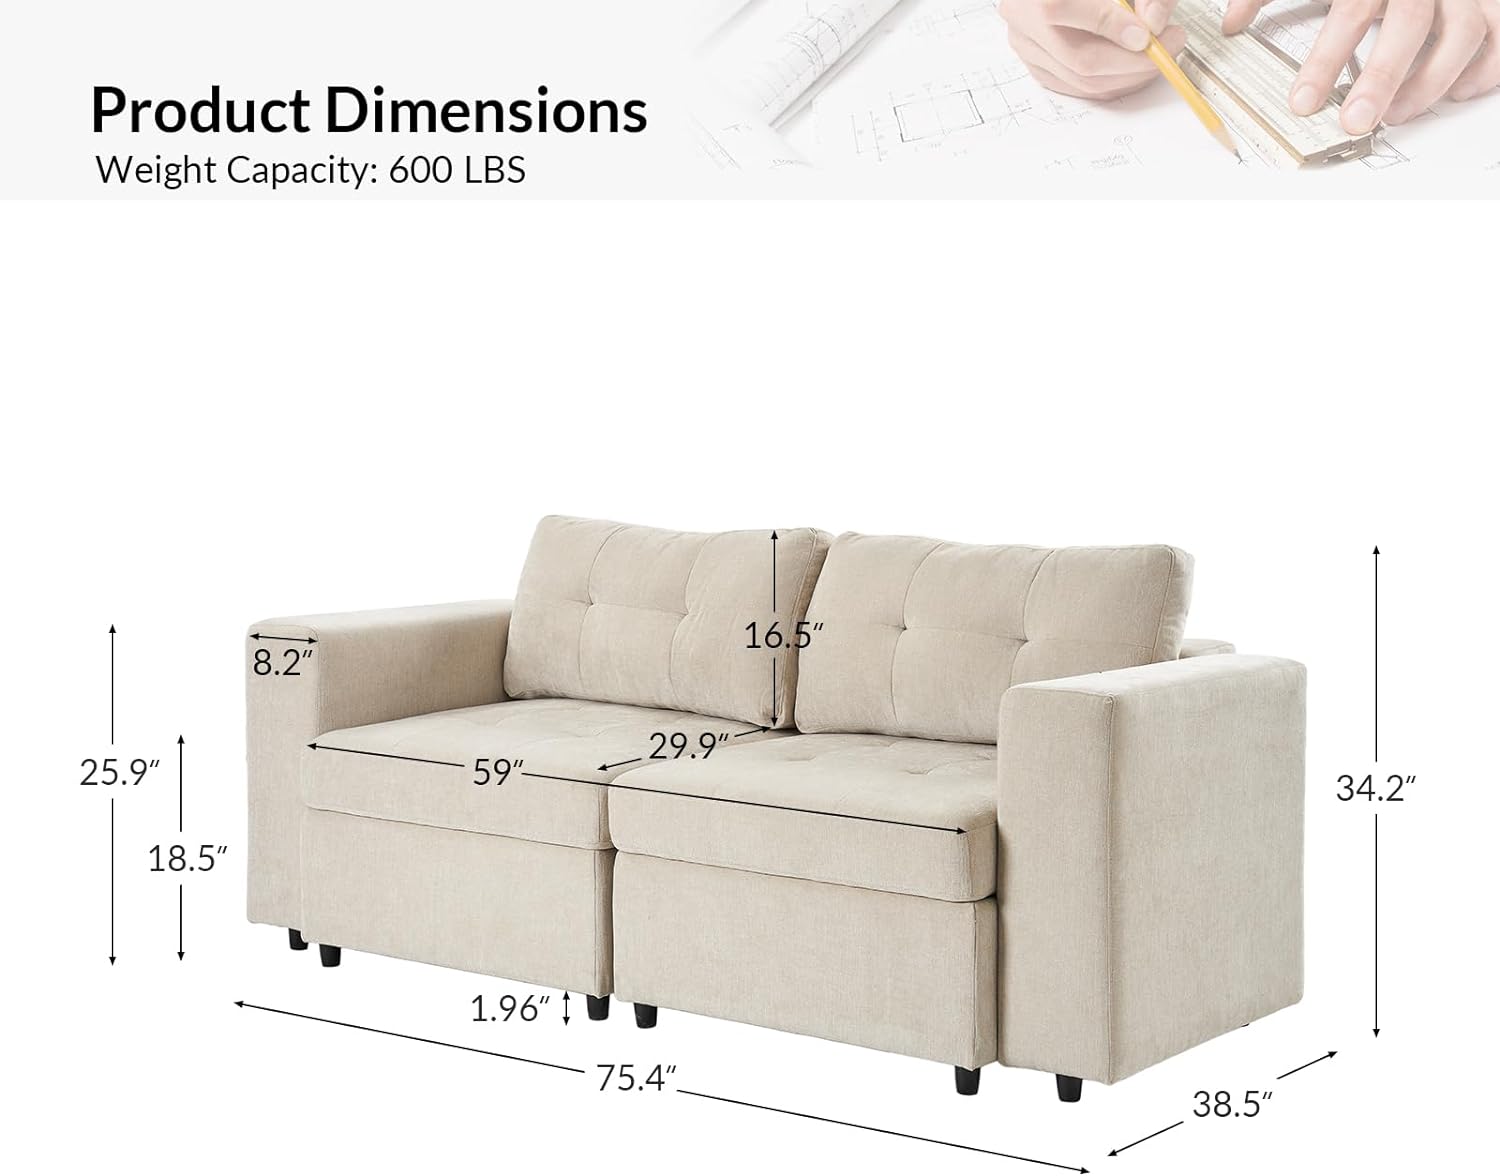 HULALA HOME Modular Sectional Sofa, U Shaped Couch with Storage and Wide Armrest,135 Inch Chenille Oversized Sleeper Sofas Set for Living Room,Beige